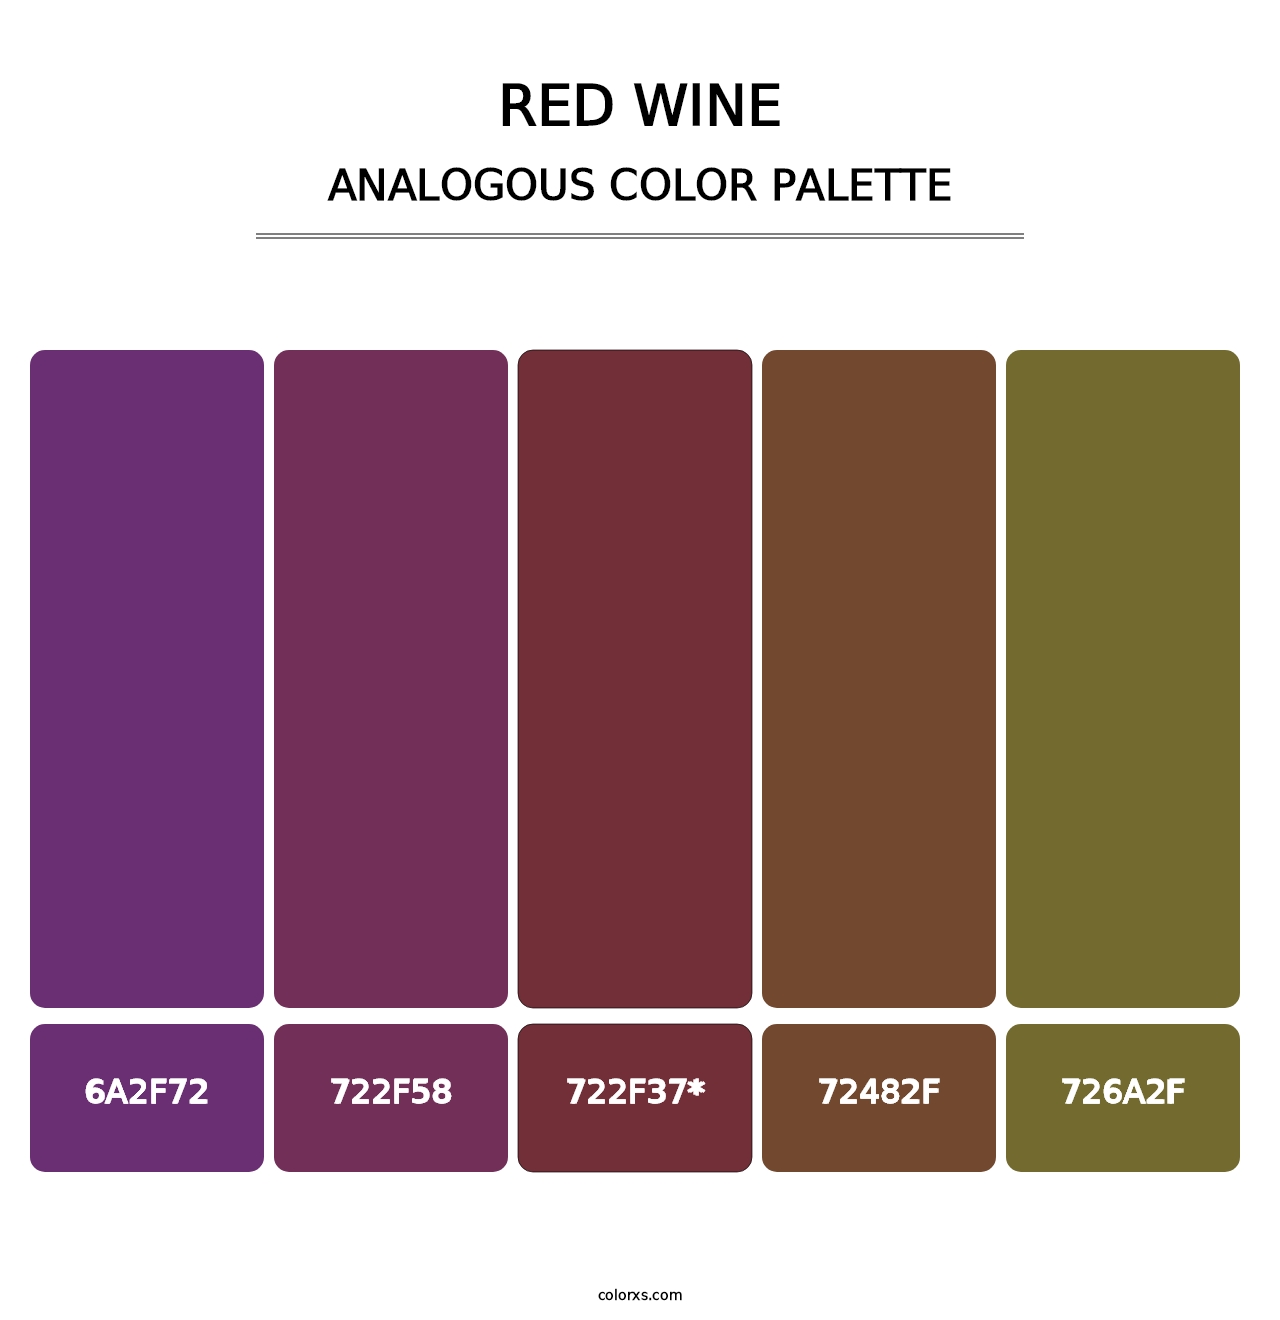 Red Wine - Analogous Color Palette